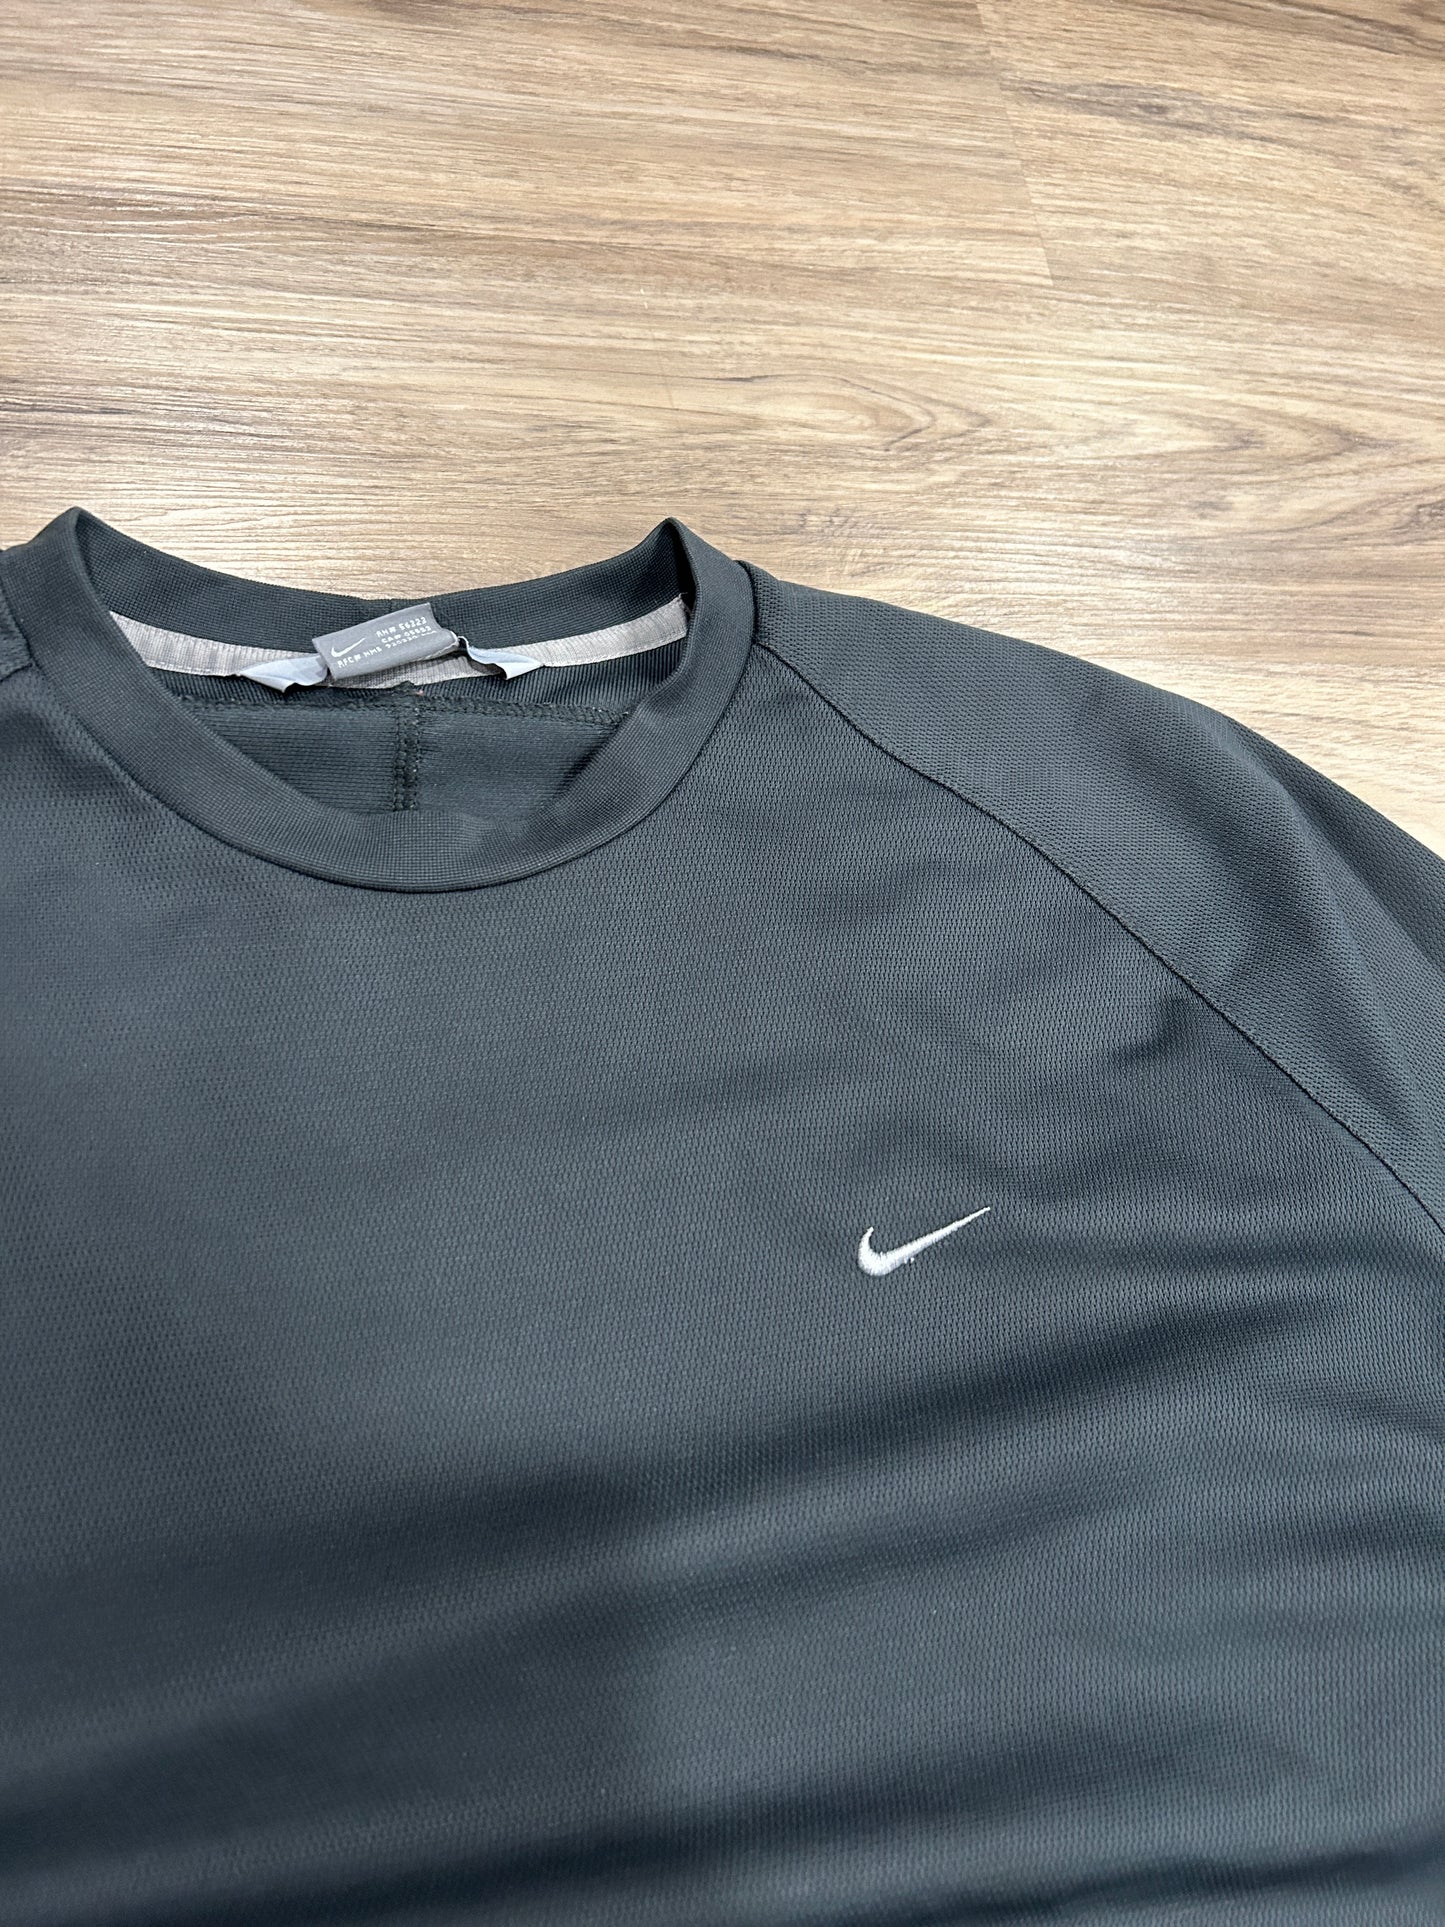 Vintage Forest Green Nike Mesh Tee (L)